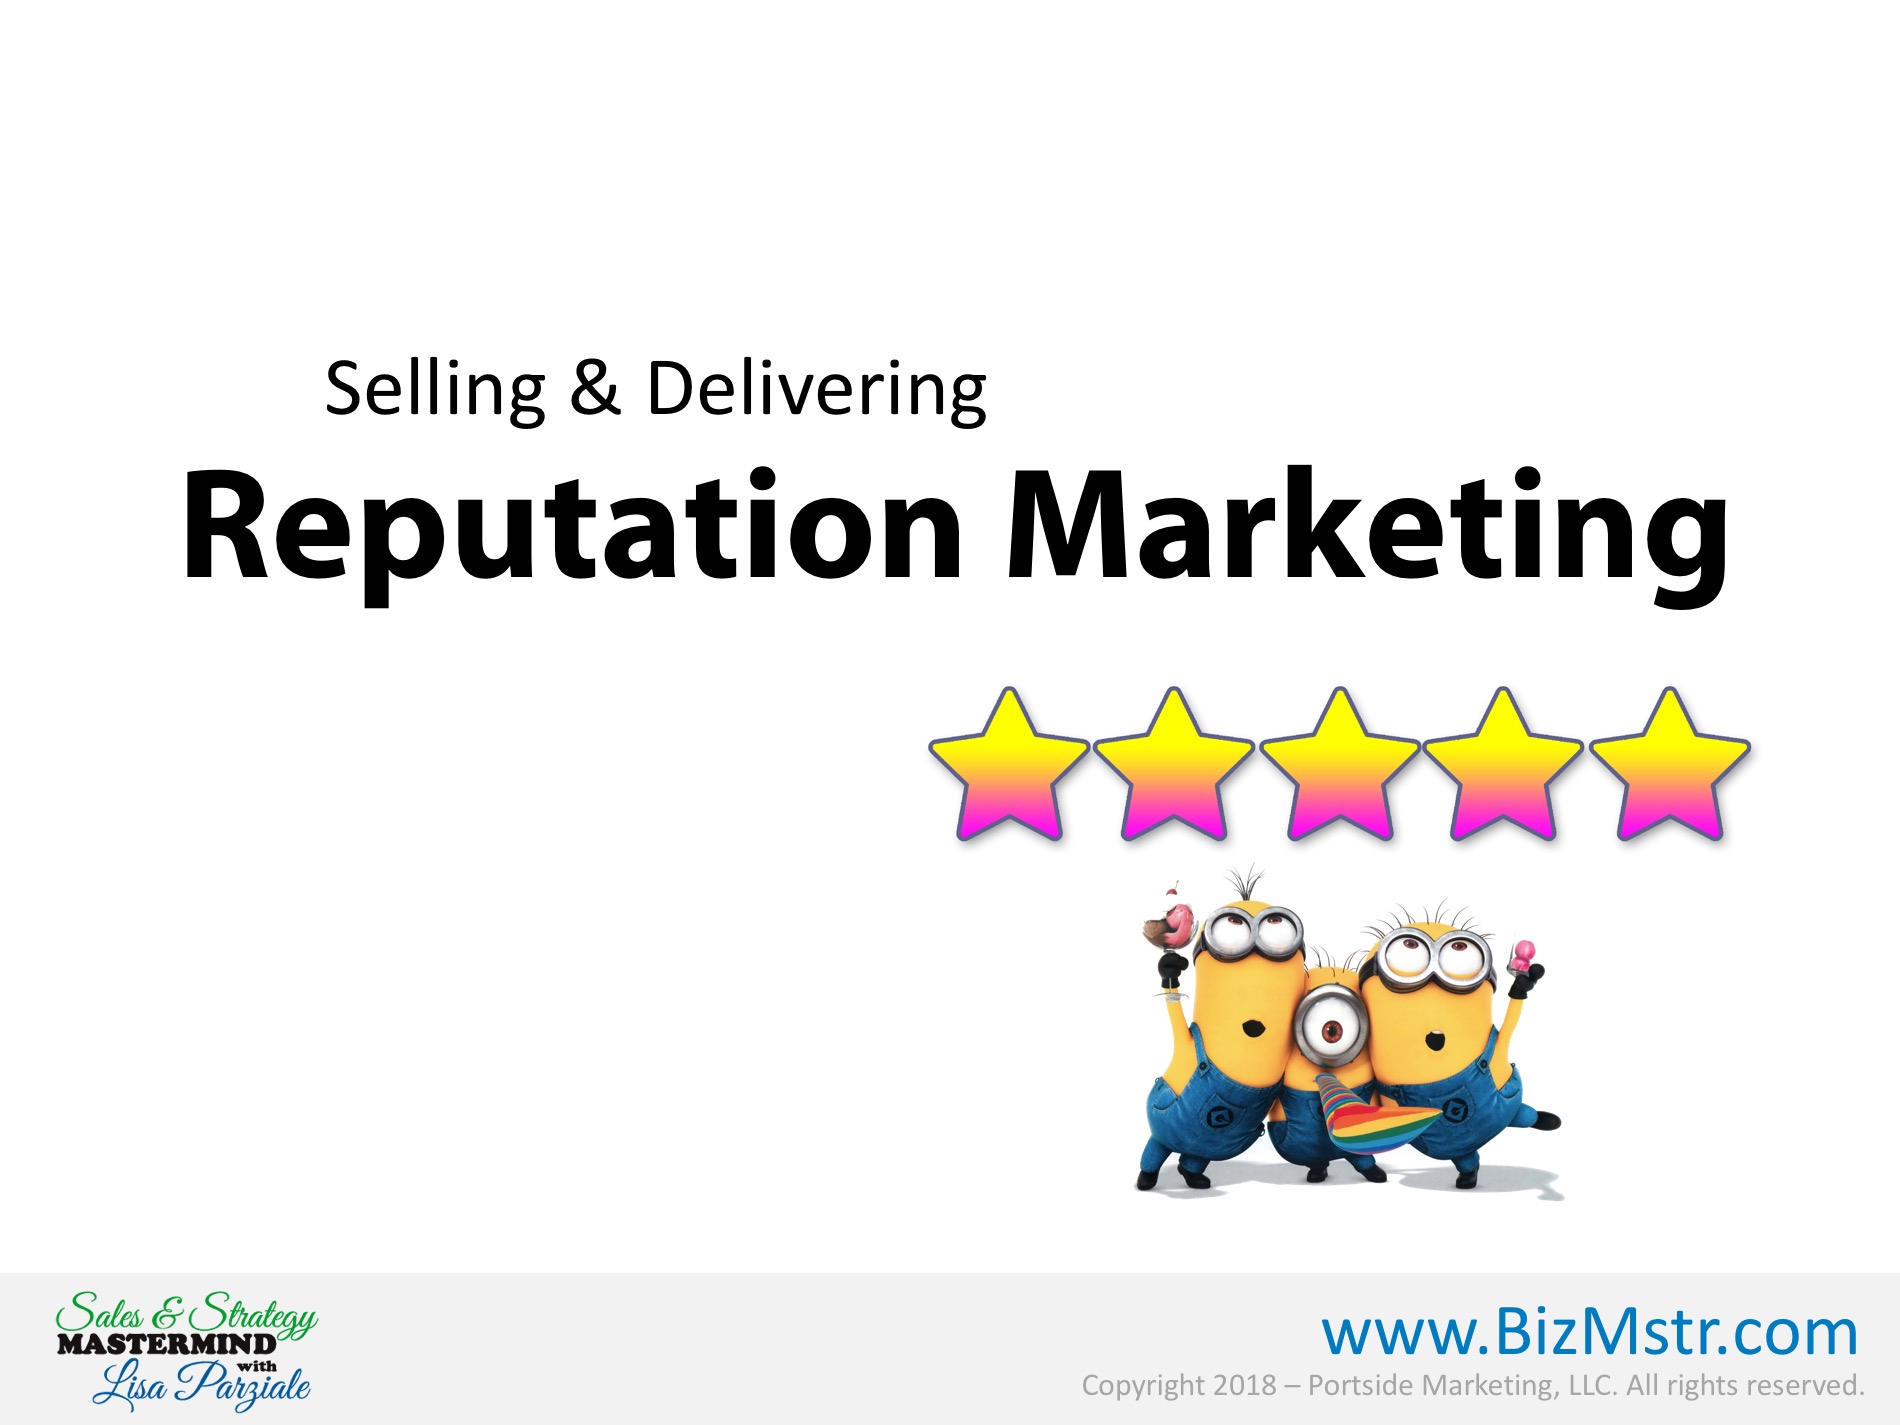 Reputation Marketing - How to sell and deliver